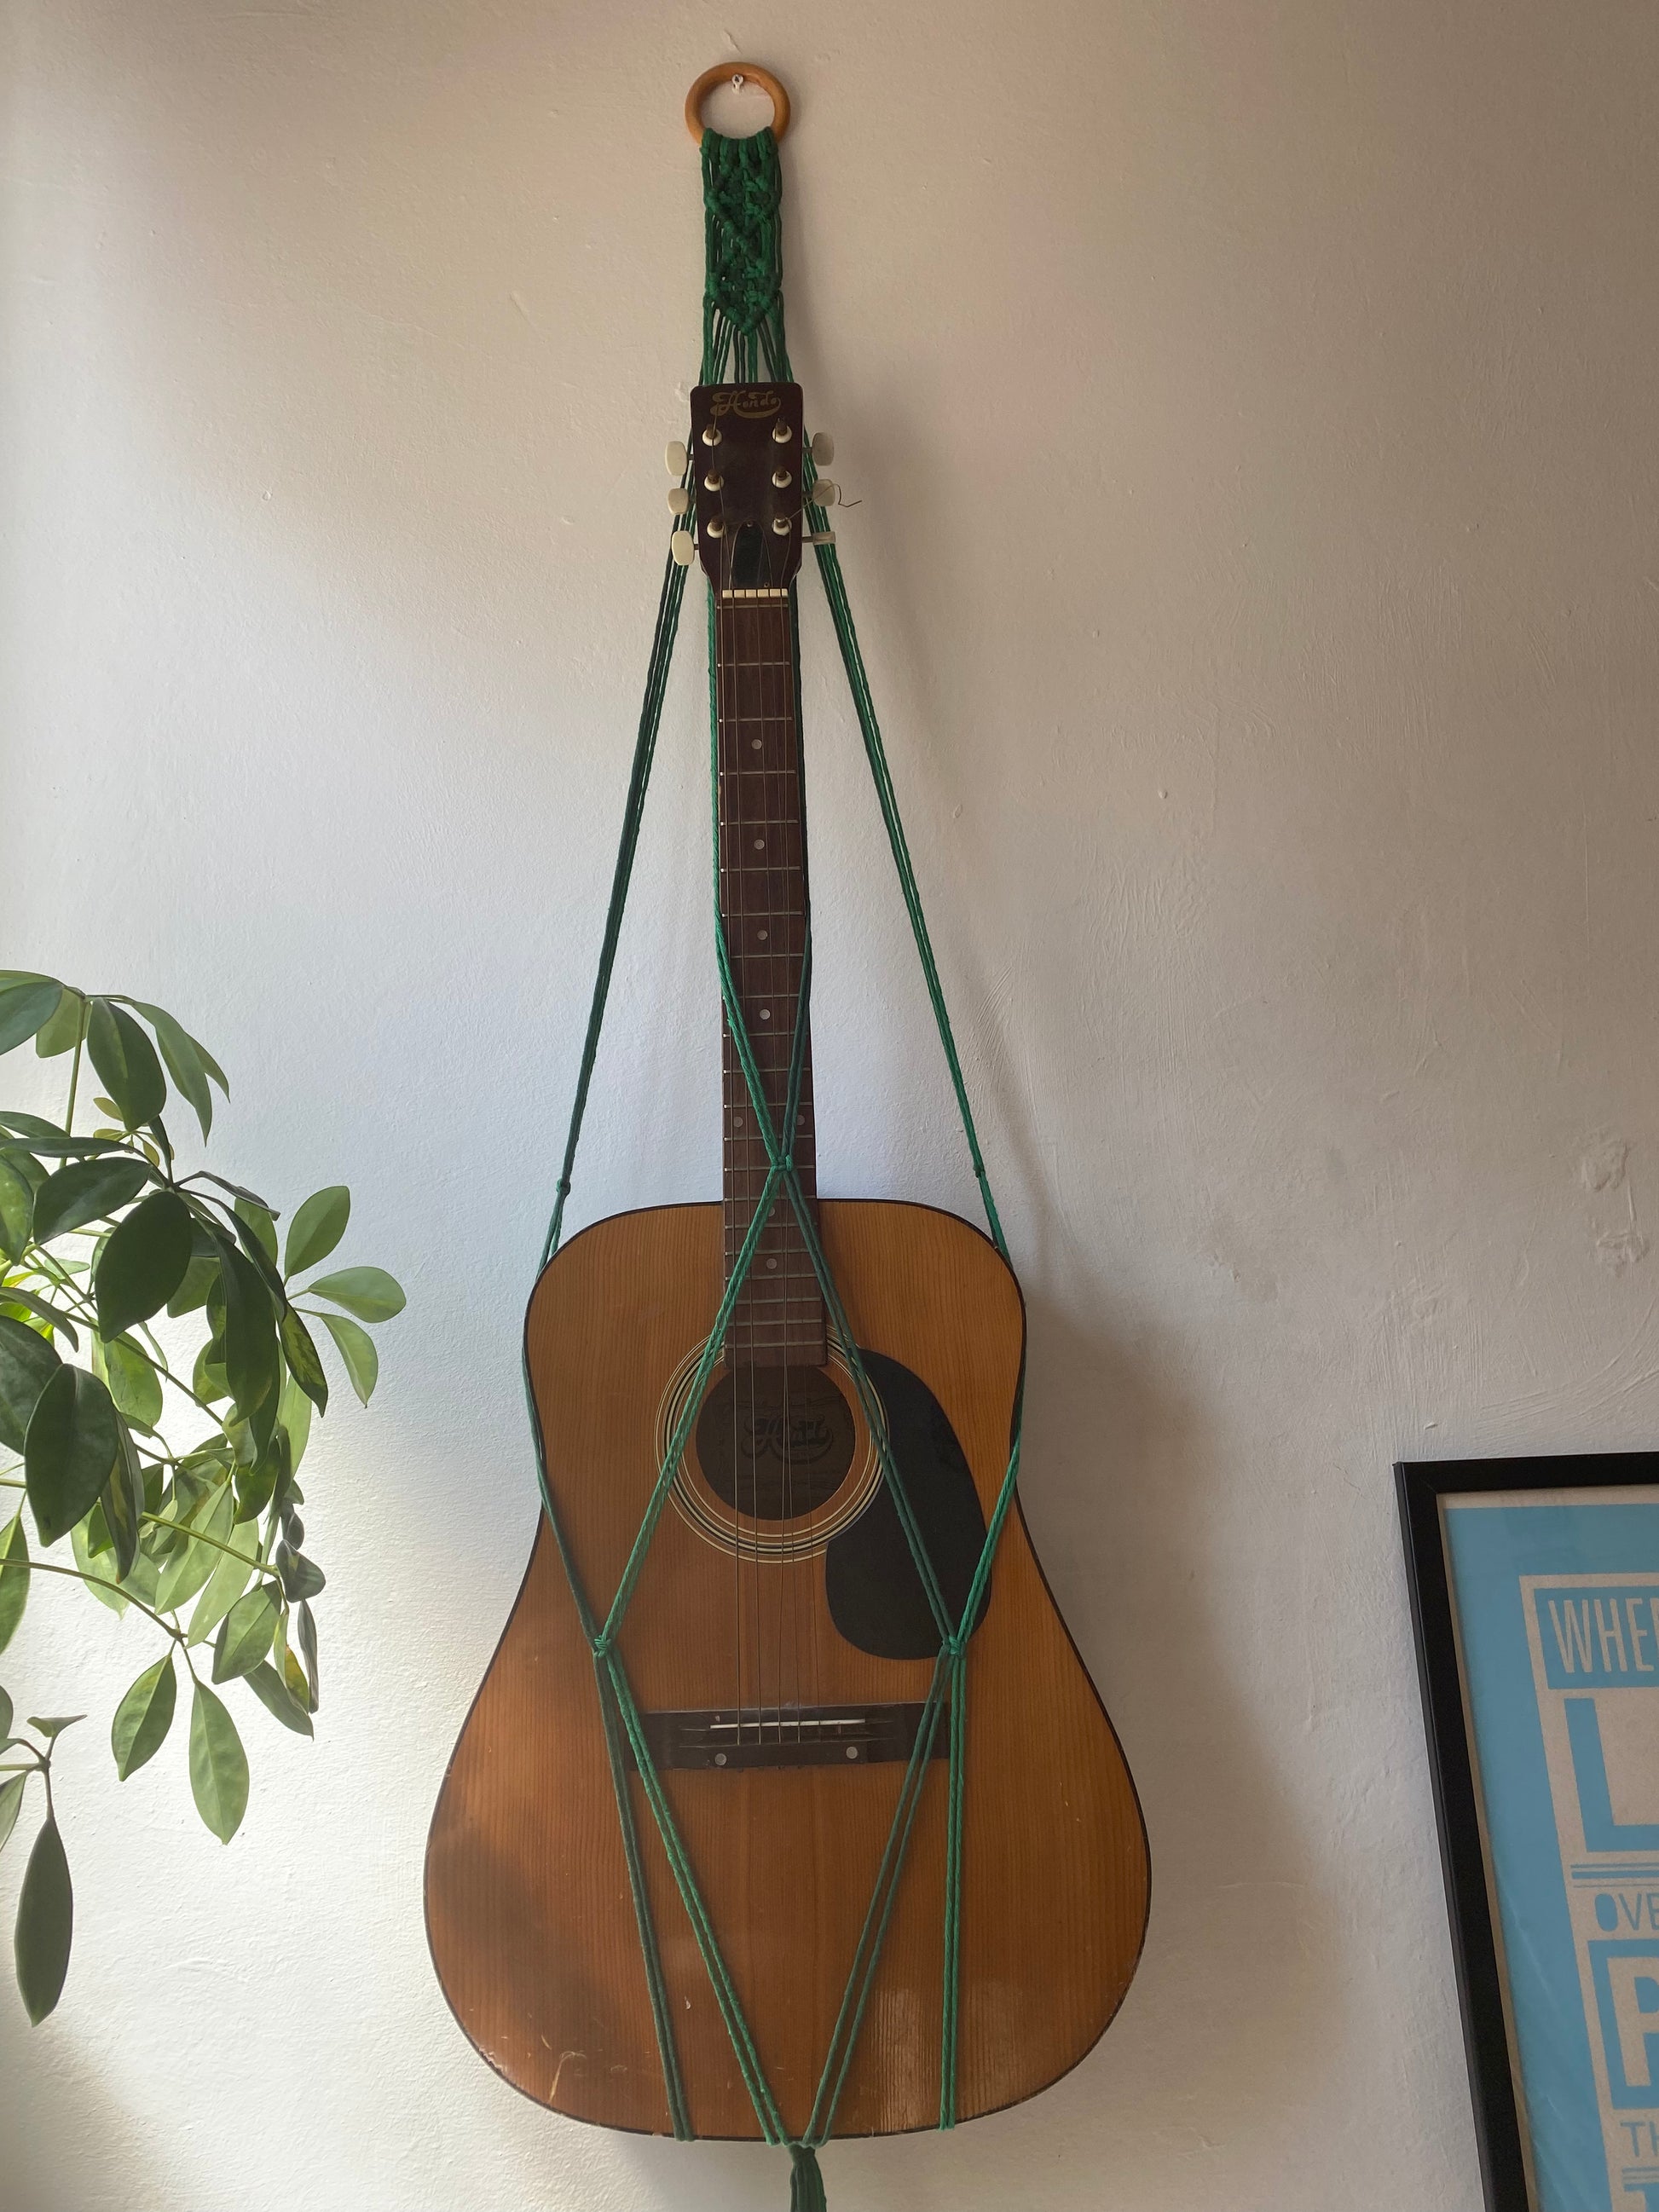 Wall hanging macrame 3/4 size guitar hanger – Macra-Made-With-Love